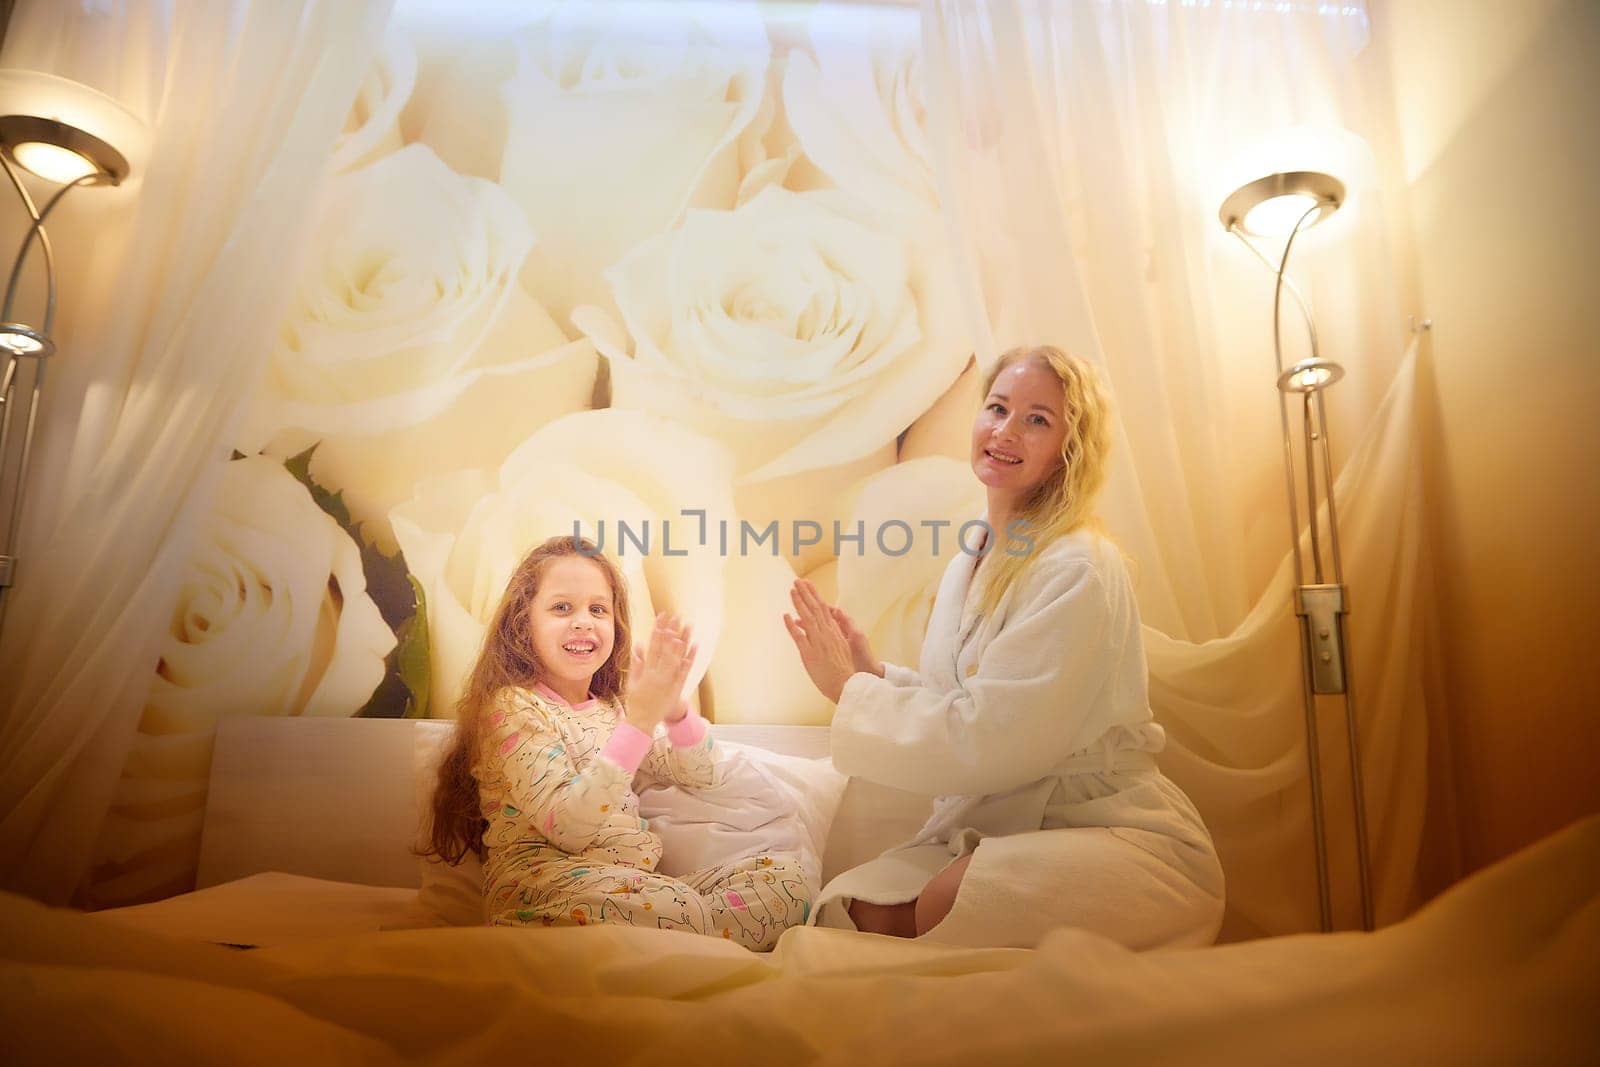 Mother and daughter having relax, fun, play together on a bed in bedroom. The concept of tenderness between mom and girl by keleny